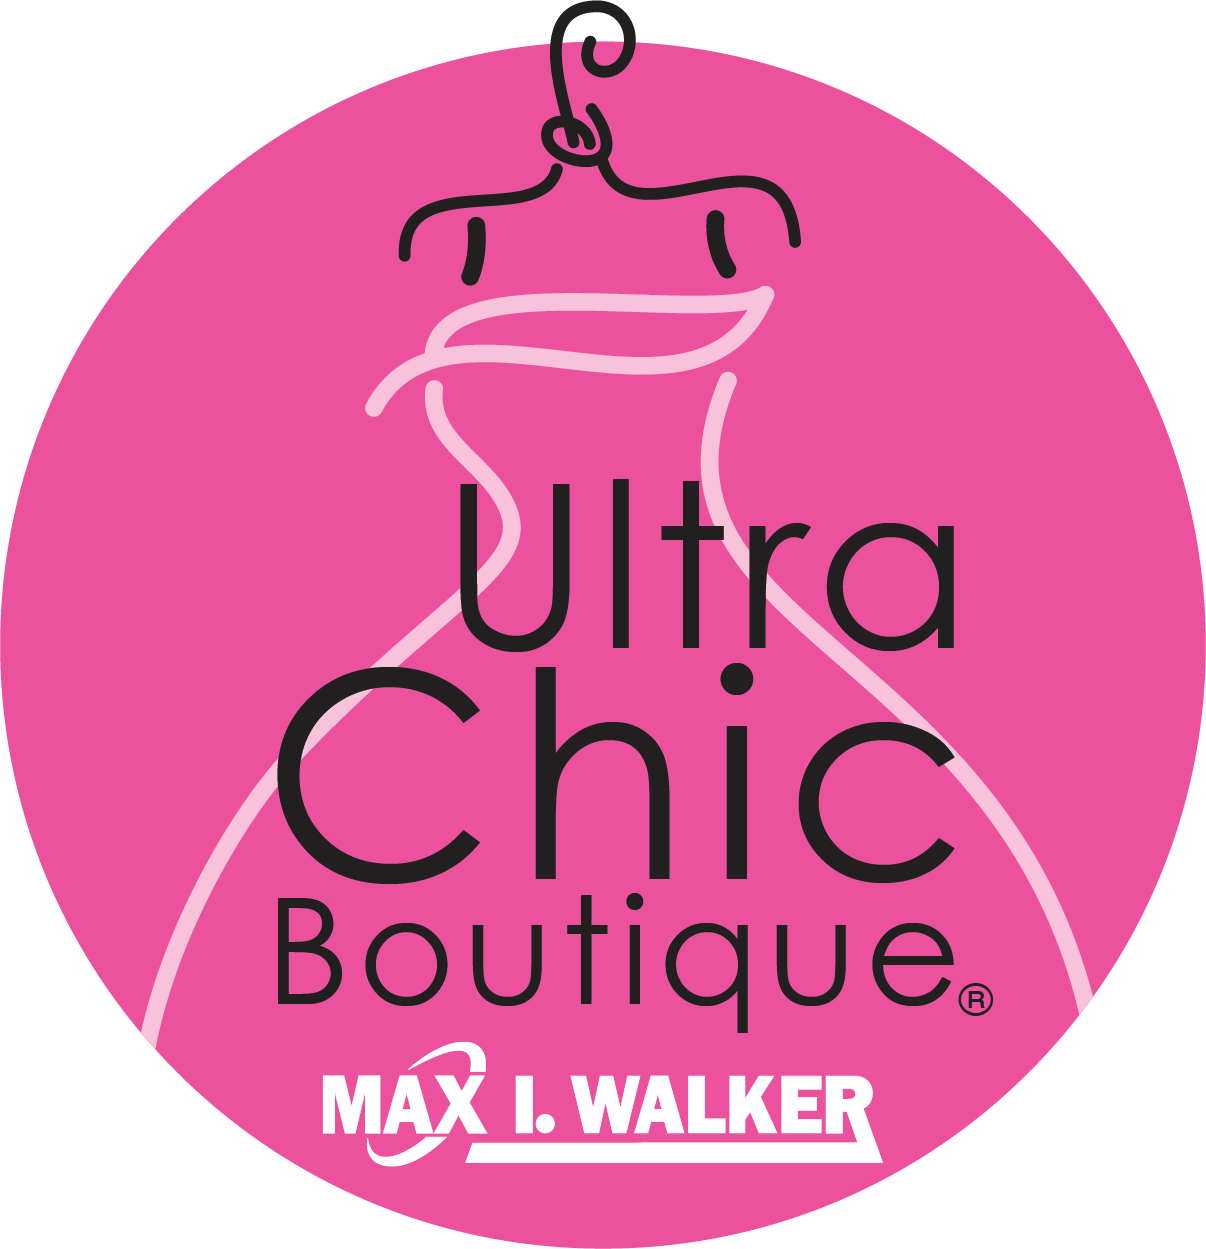 Max I. Walker Ultra Chic Boutique